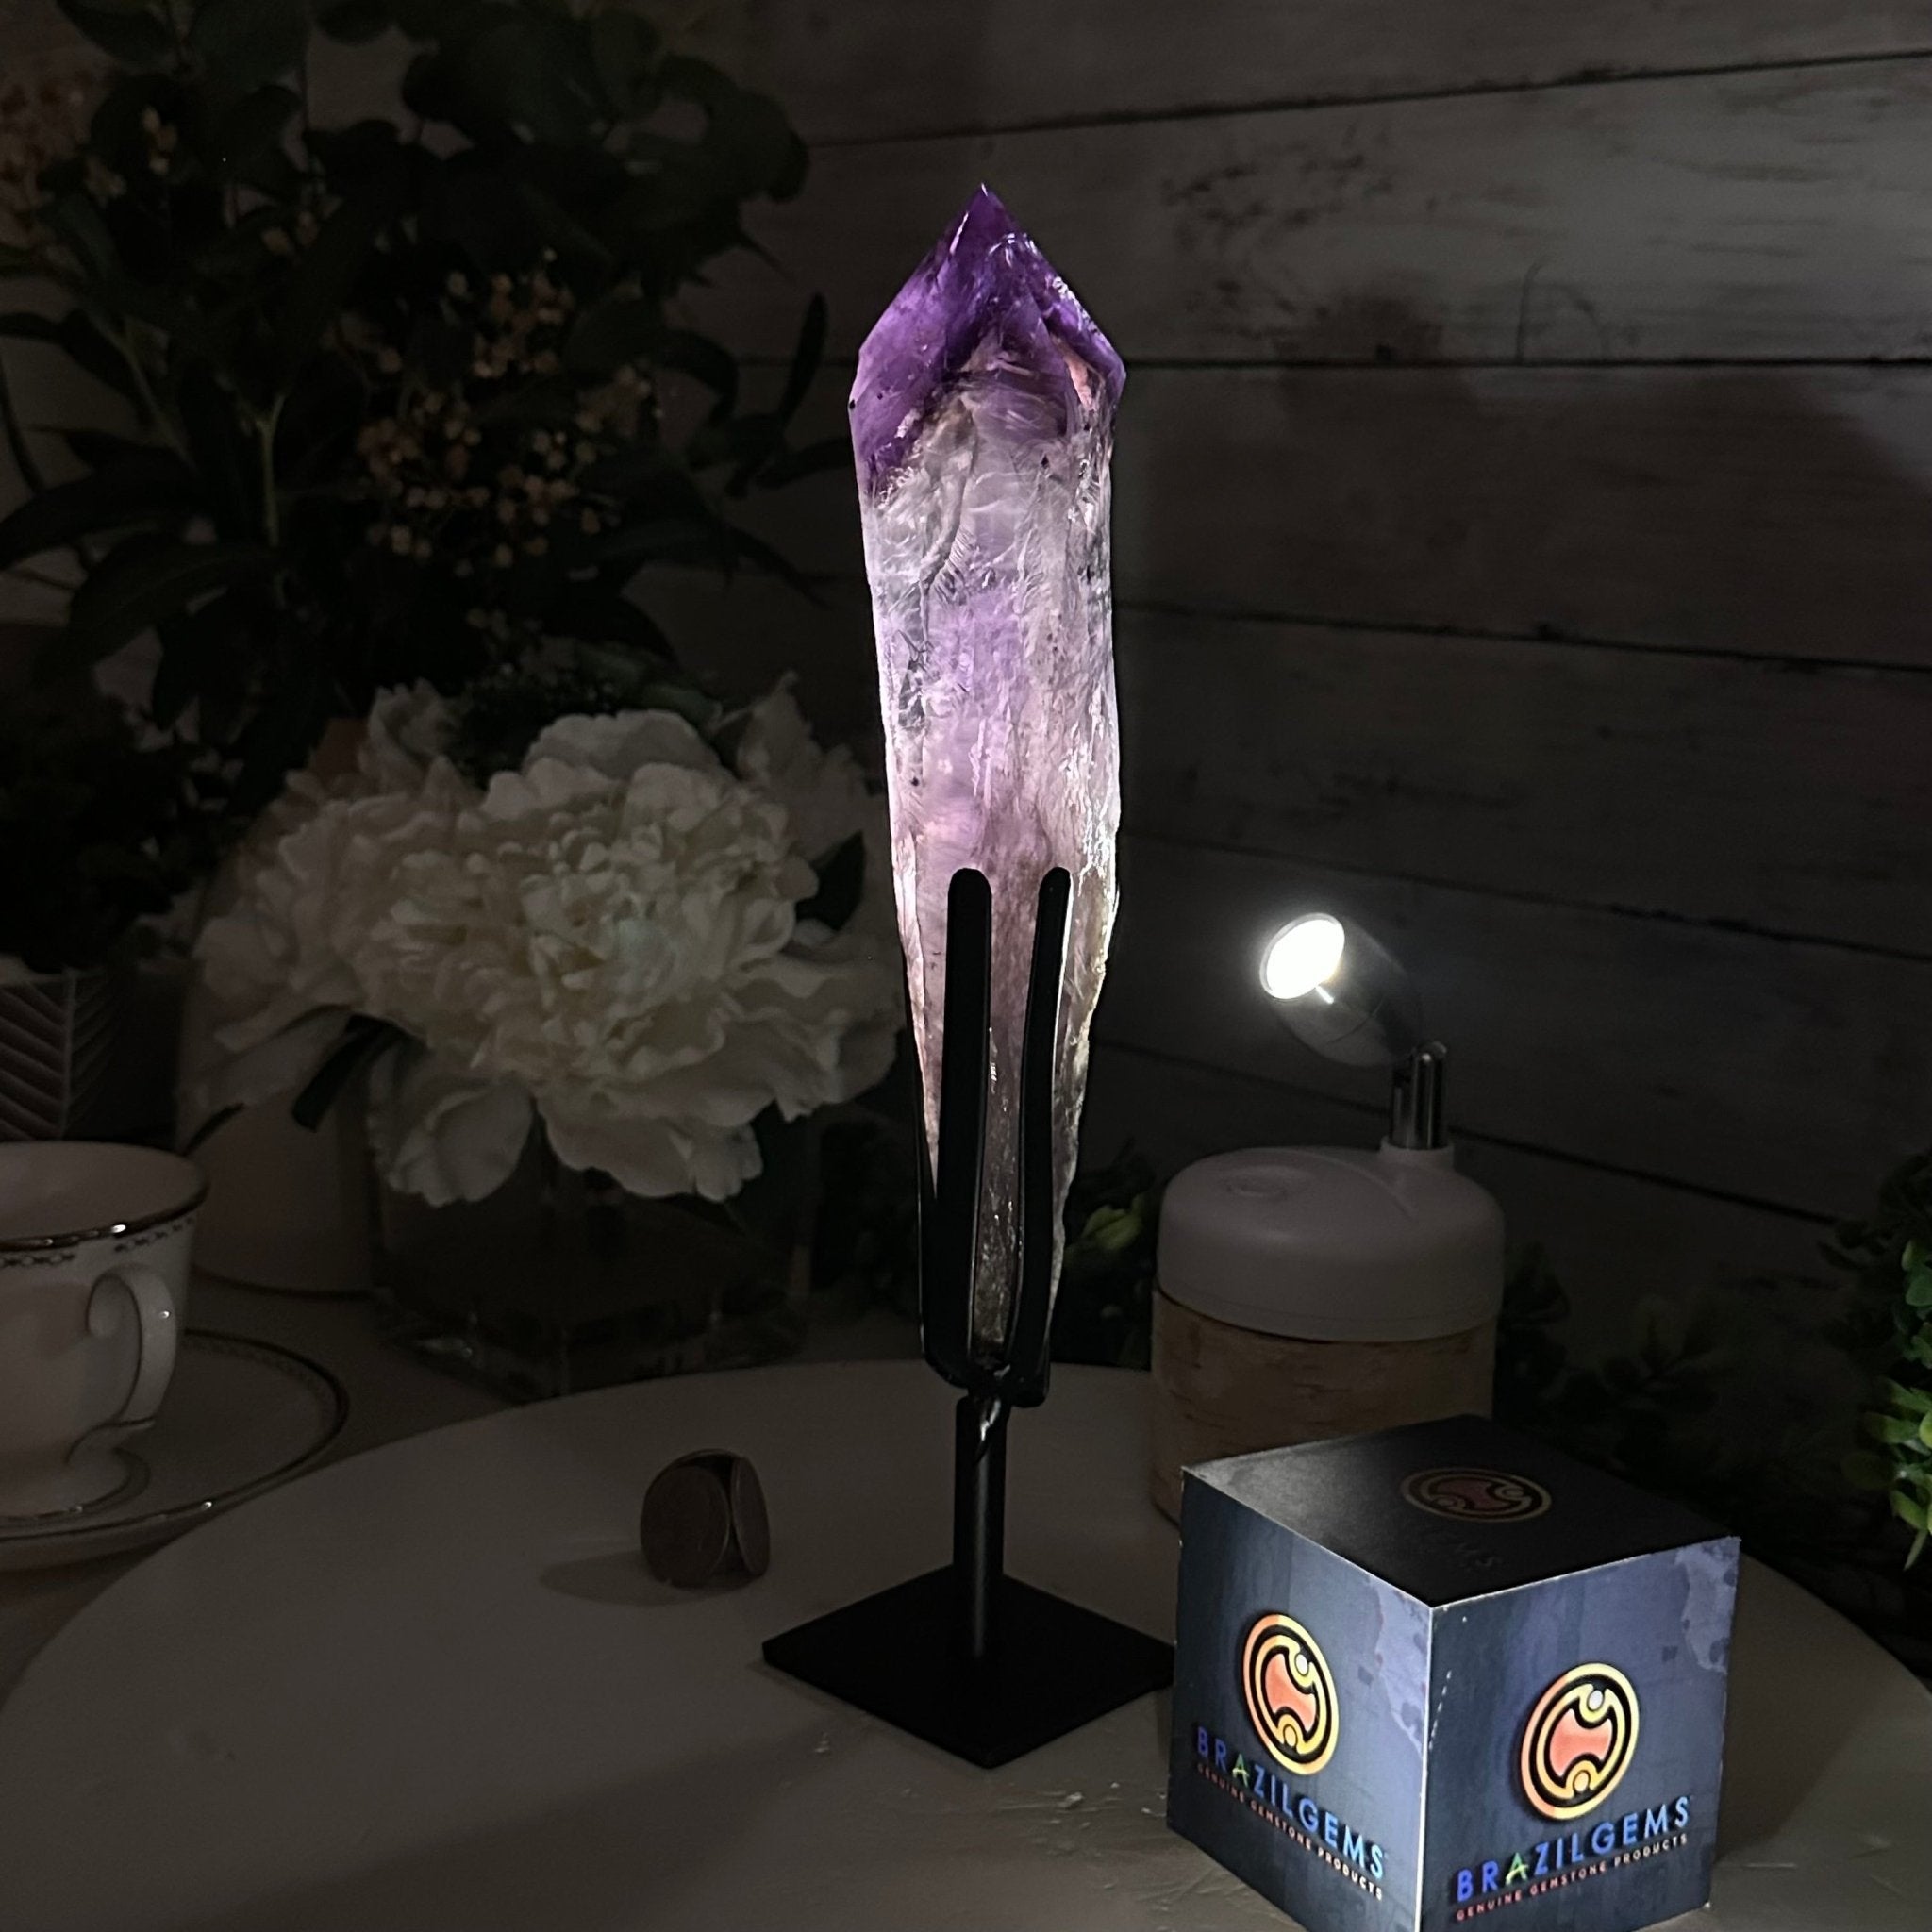 Super Quality Amethyst Wand on a Metal Stand, 1.6 lbs & 11" Tall #3123AM-002 - Brazil GemsBrazil GemsSuper Quality Amethyst Wand on a Metal Stand, 1.6 lbs & 11" Tall #3123AM-002Clusters on Fixed Bases3123AM-002